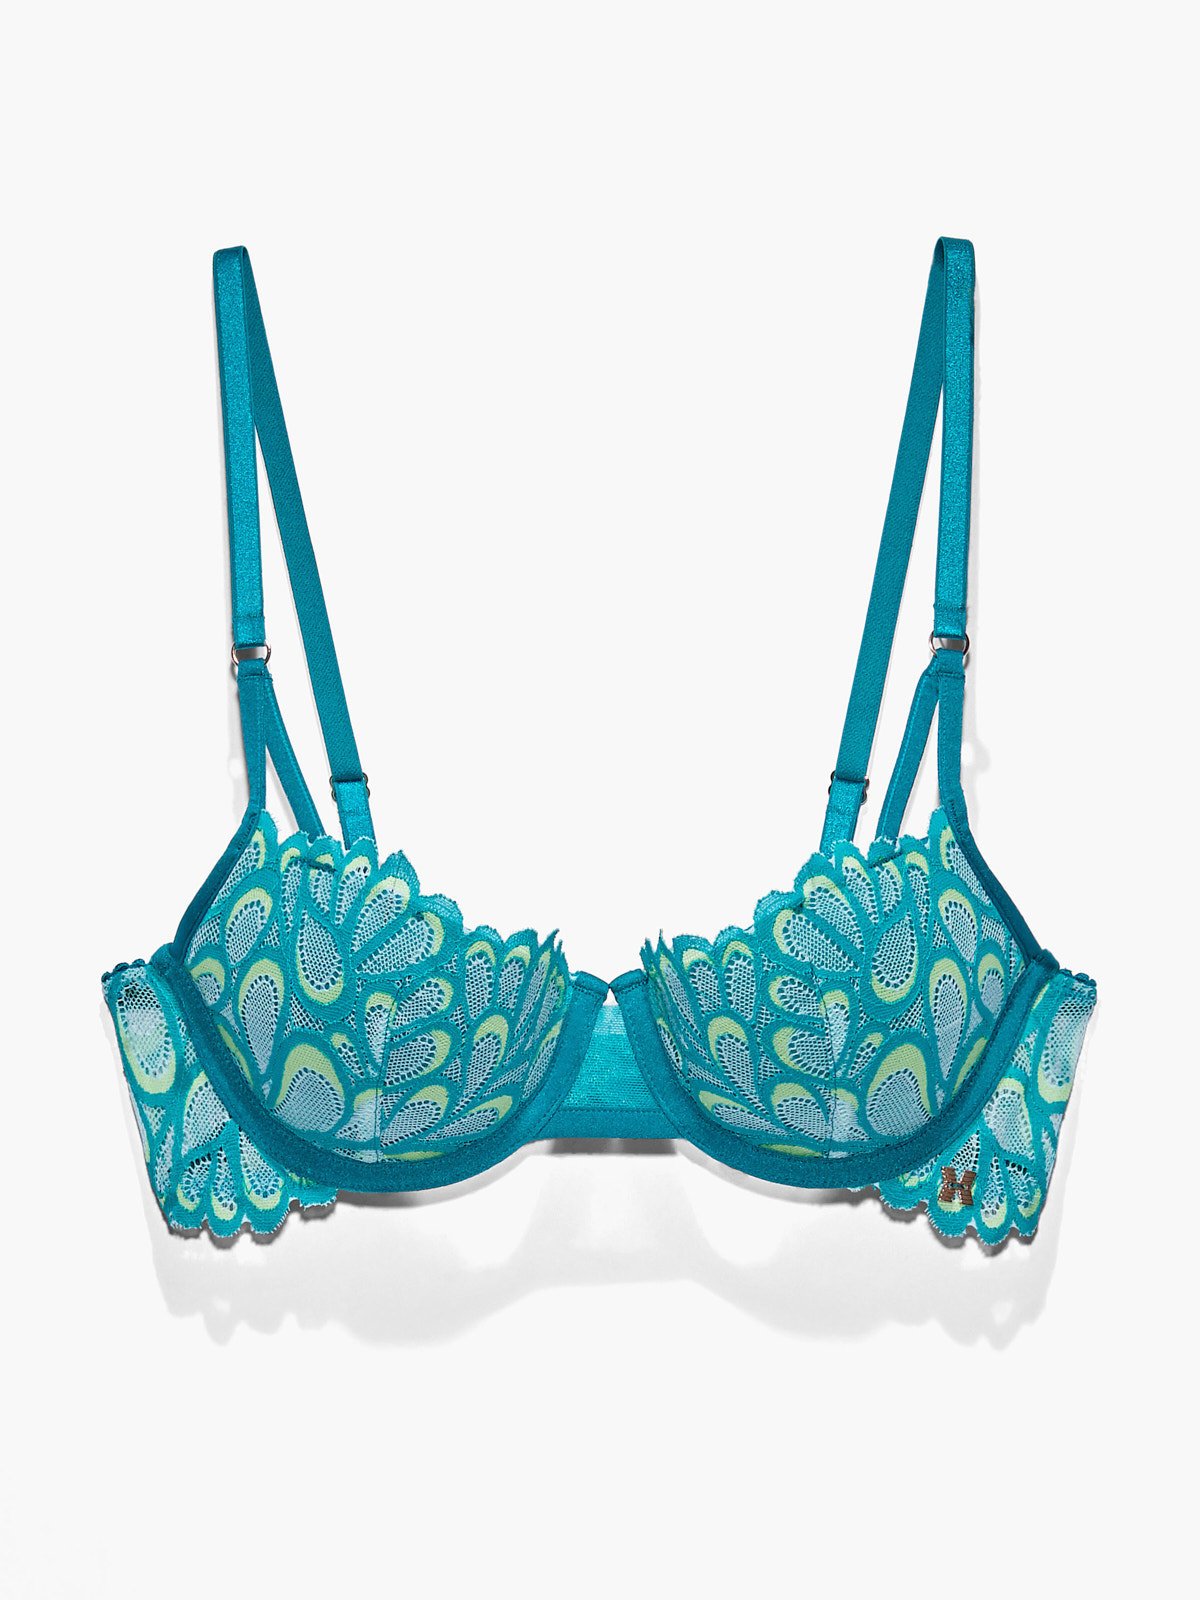 Savage X Savage Not Sorry Unlined Lace Balconette Bra in Green